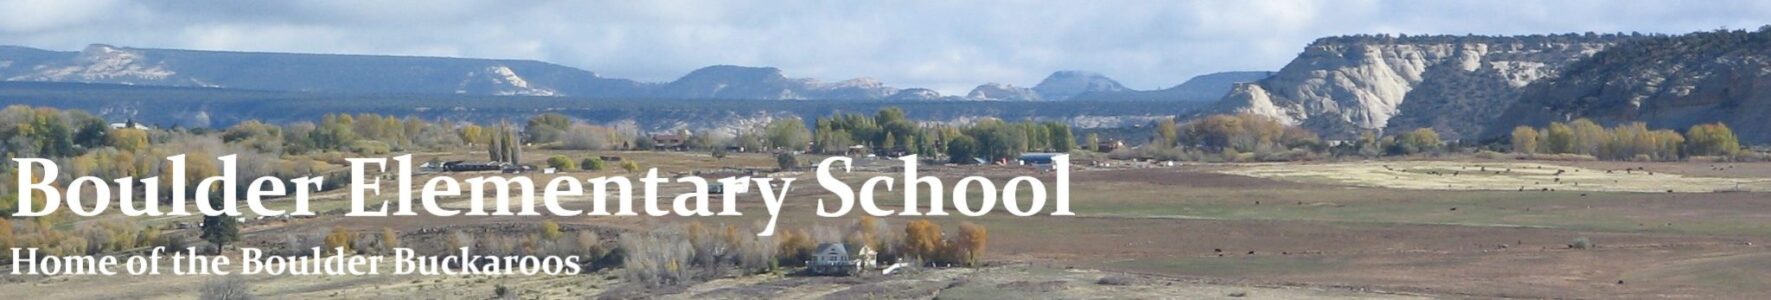 Utah elementary school to shift to four-day schedule in fall